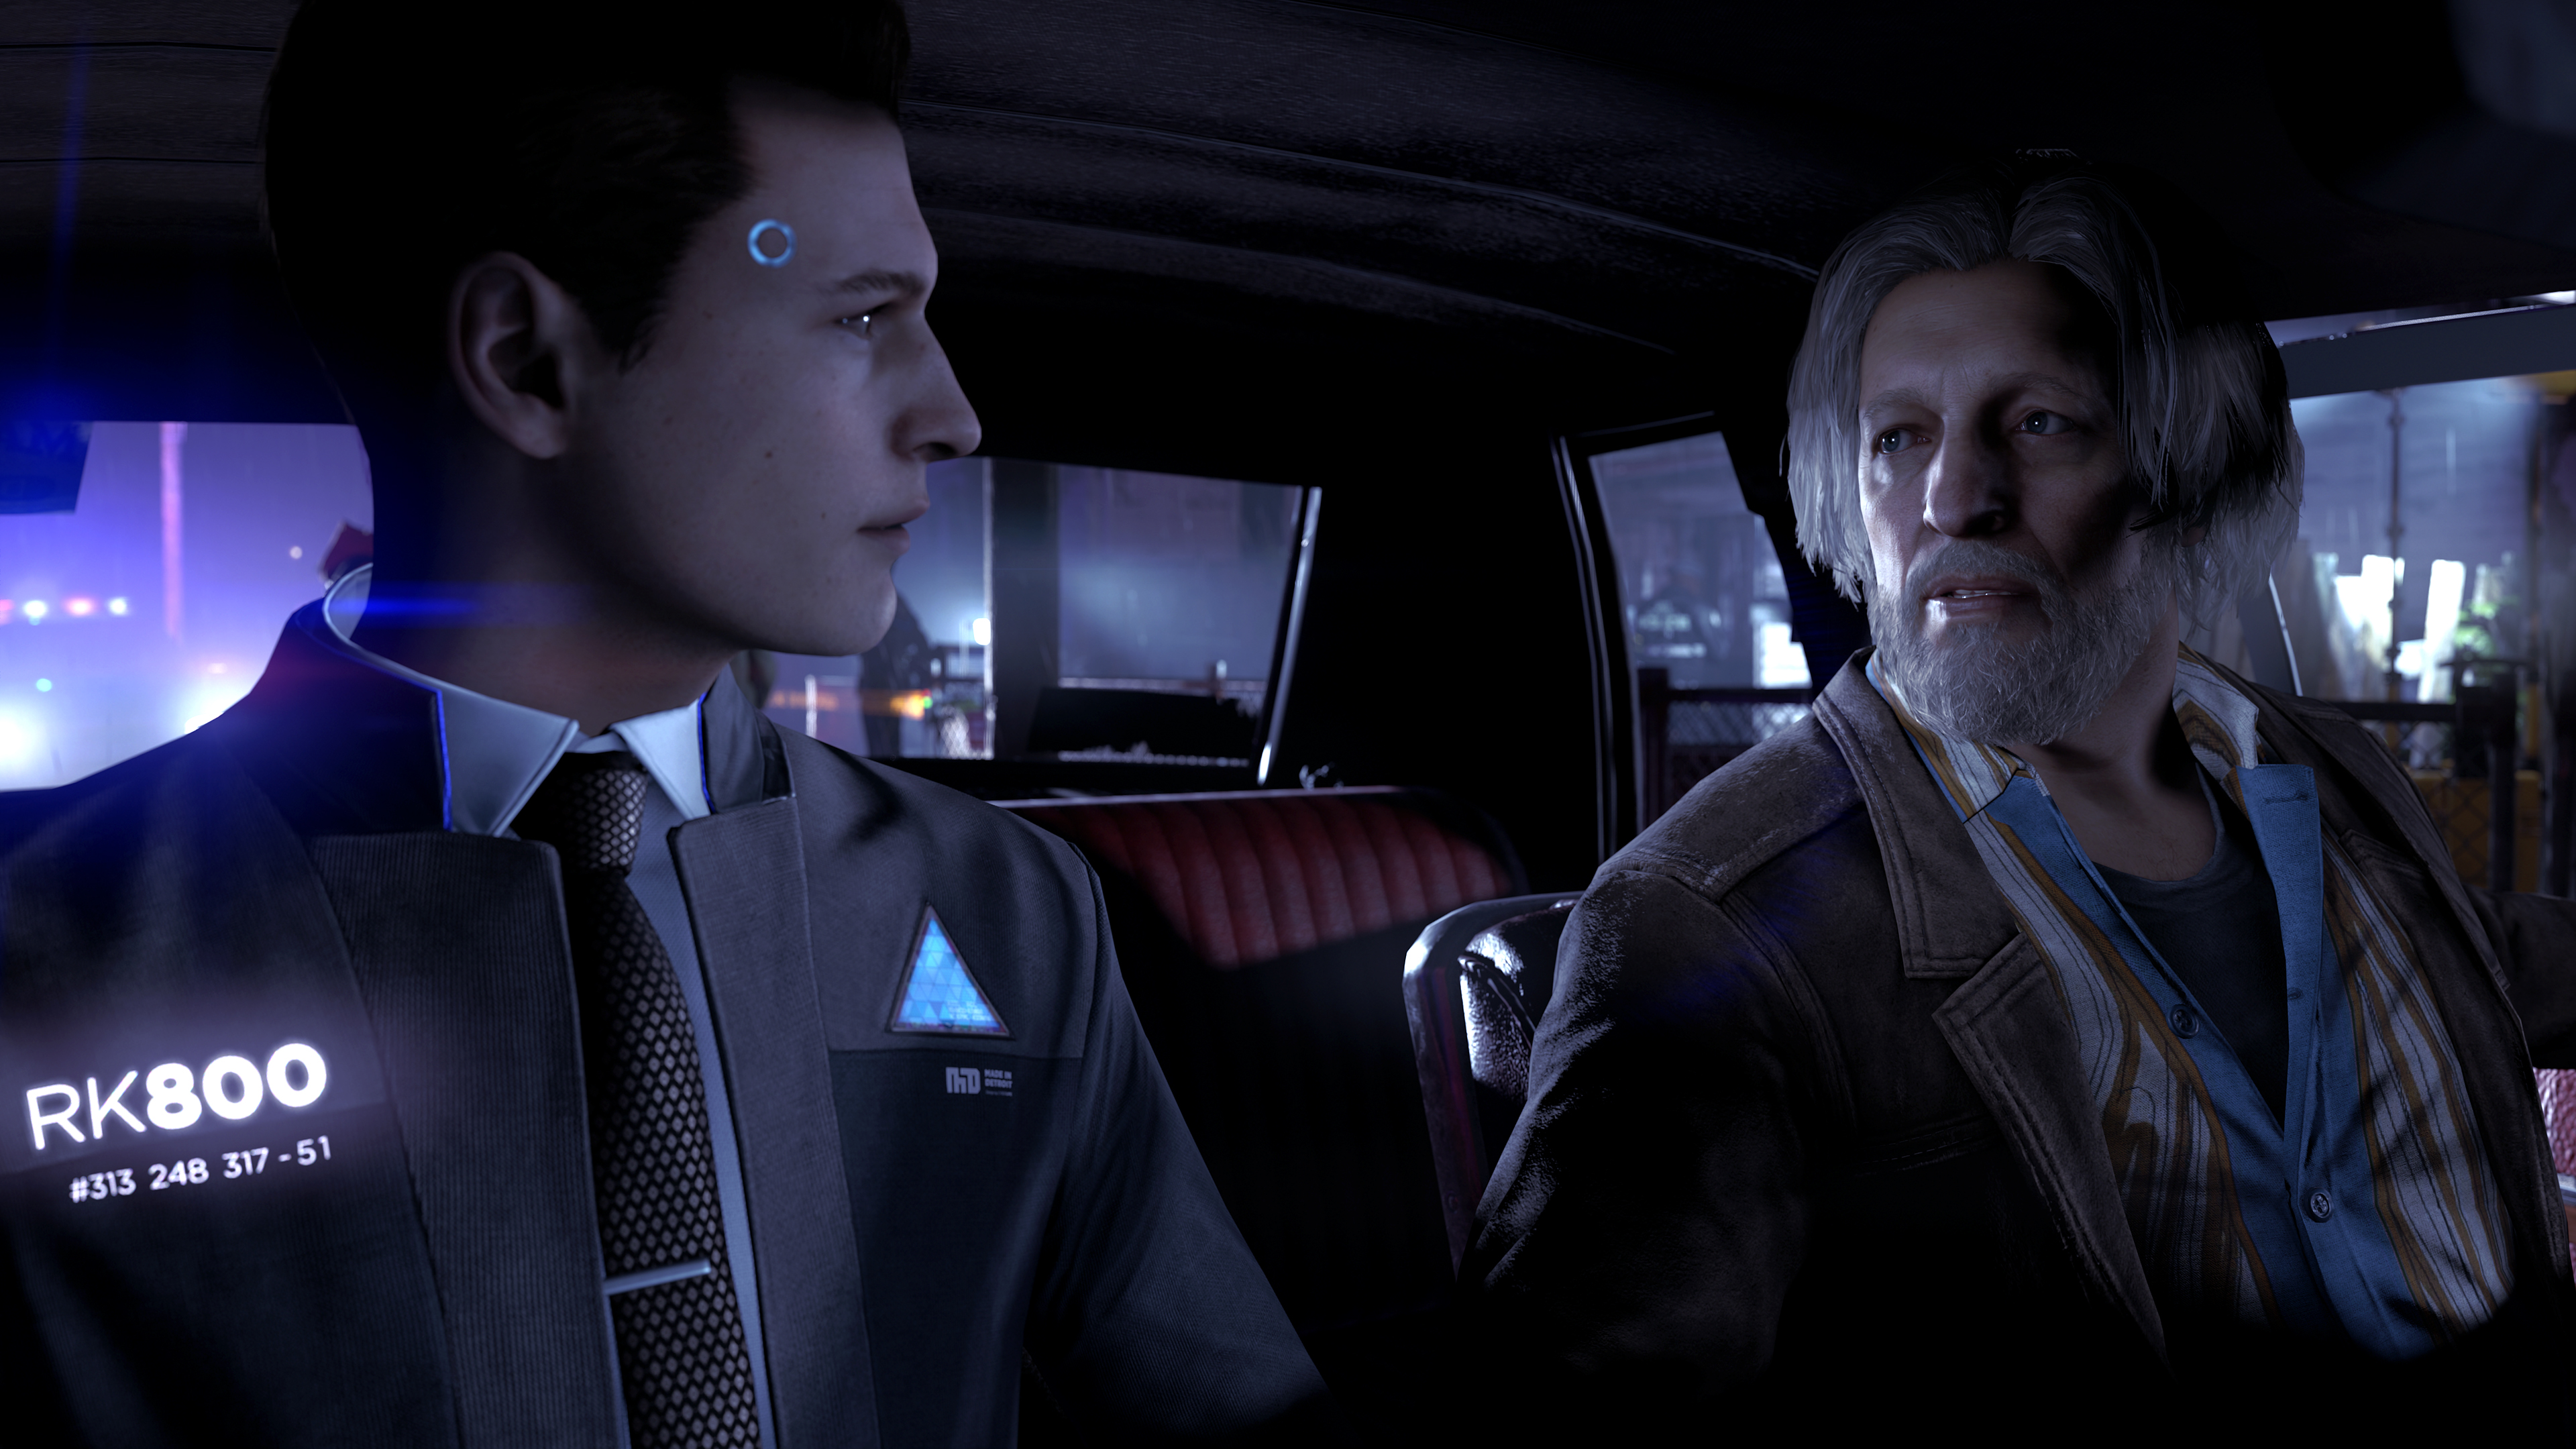 General 3840x2160 video games PlayStation 4 Detroit: Become Human Connor (Detroit: Become Human) Playstation 4 Pro Quantic Dream video game characters